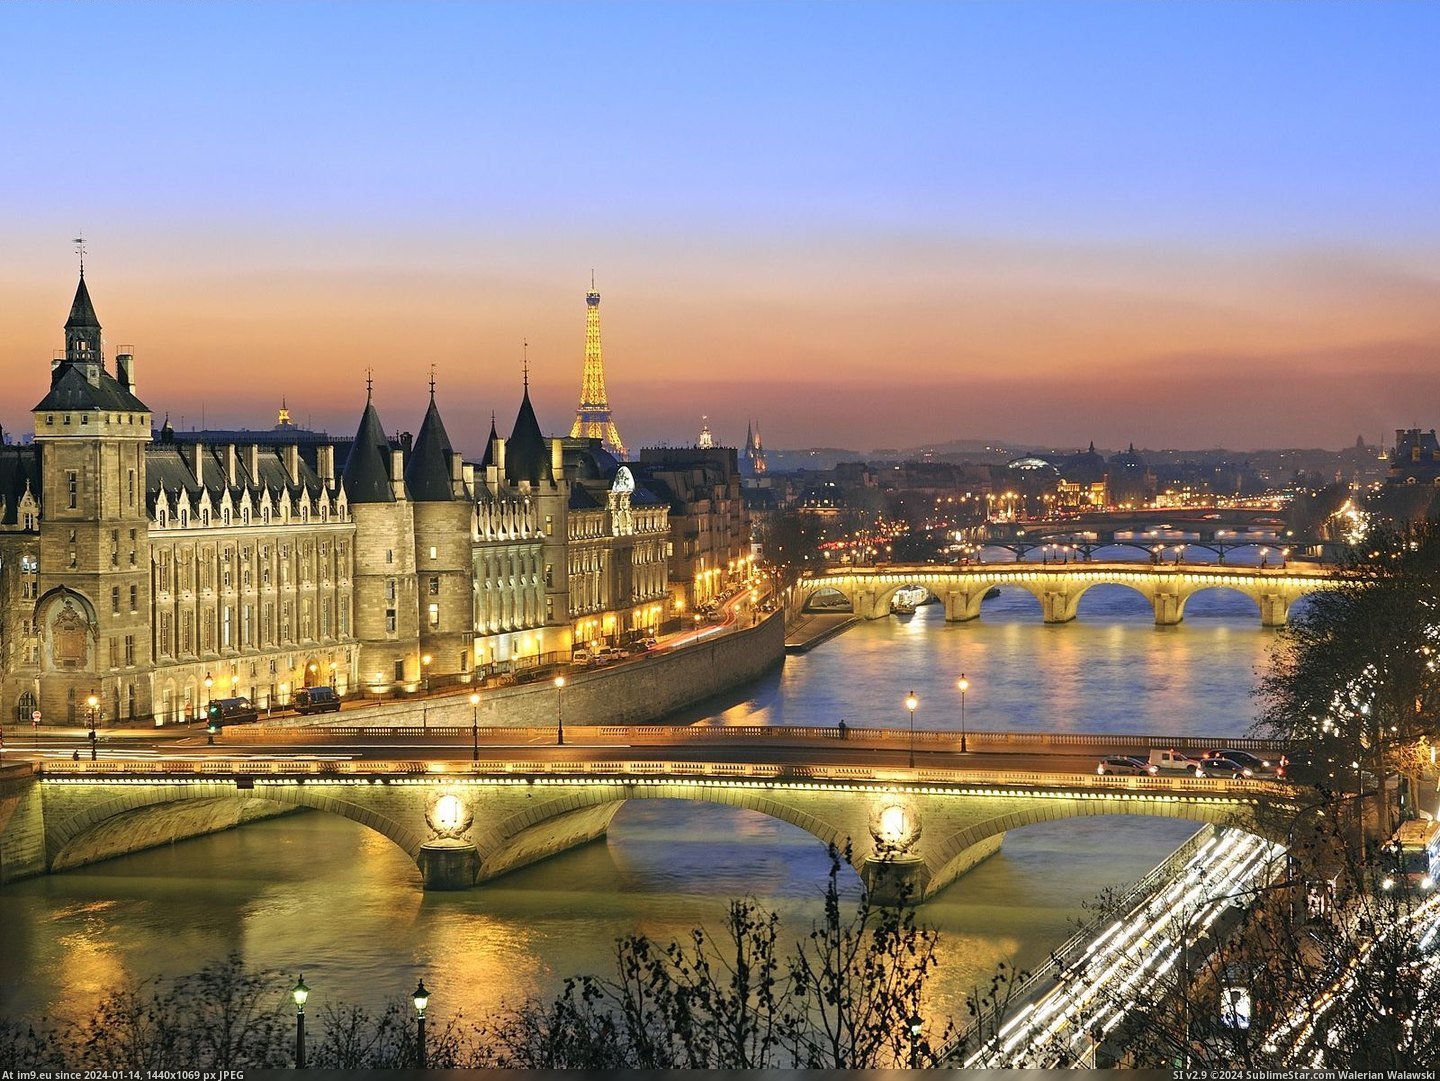 Paris on the Banks of the Seine River, France (in Beautiful photos and wallpapers)